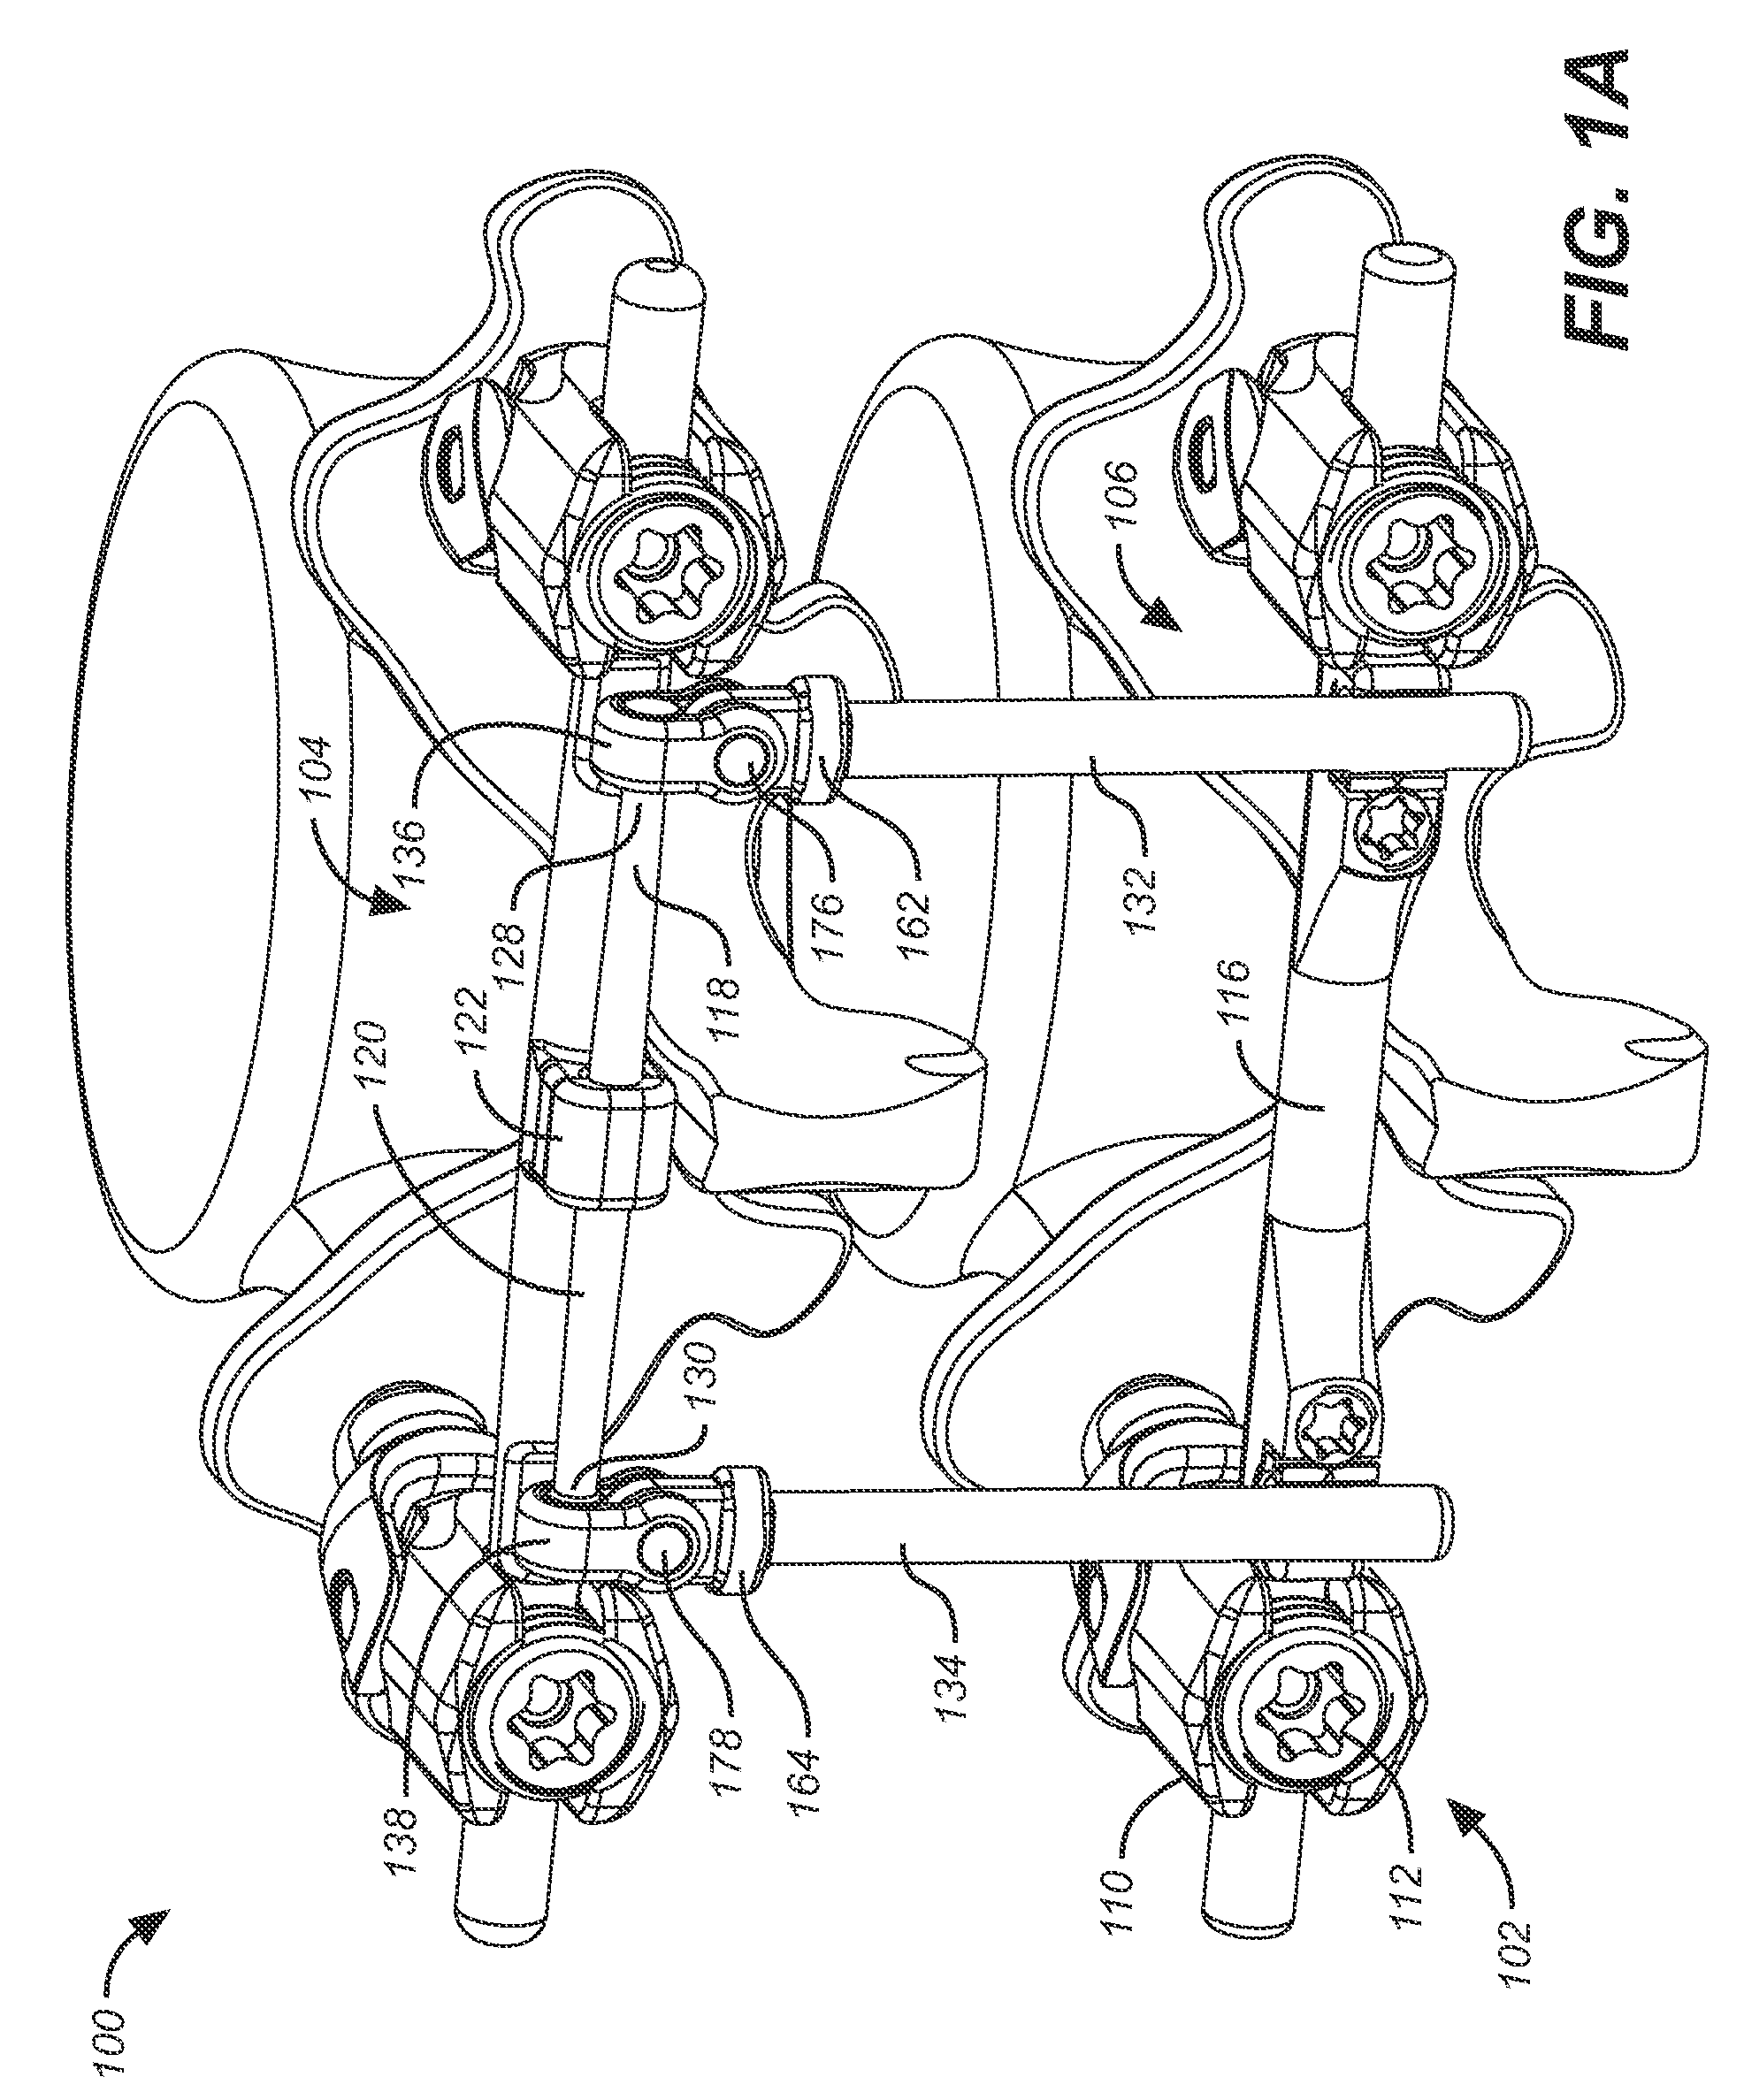 Bone anchor with a yoke-shaped anchor head for a dynamic stabilization and motion preservation spinal implantation system and method